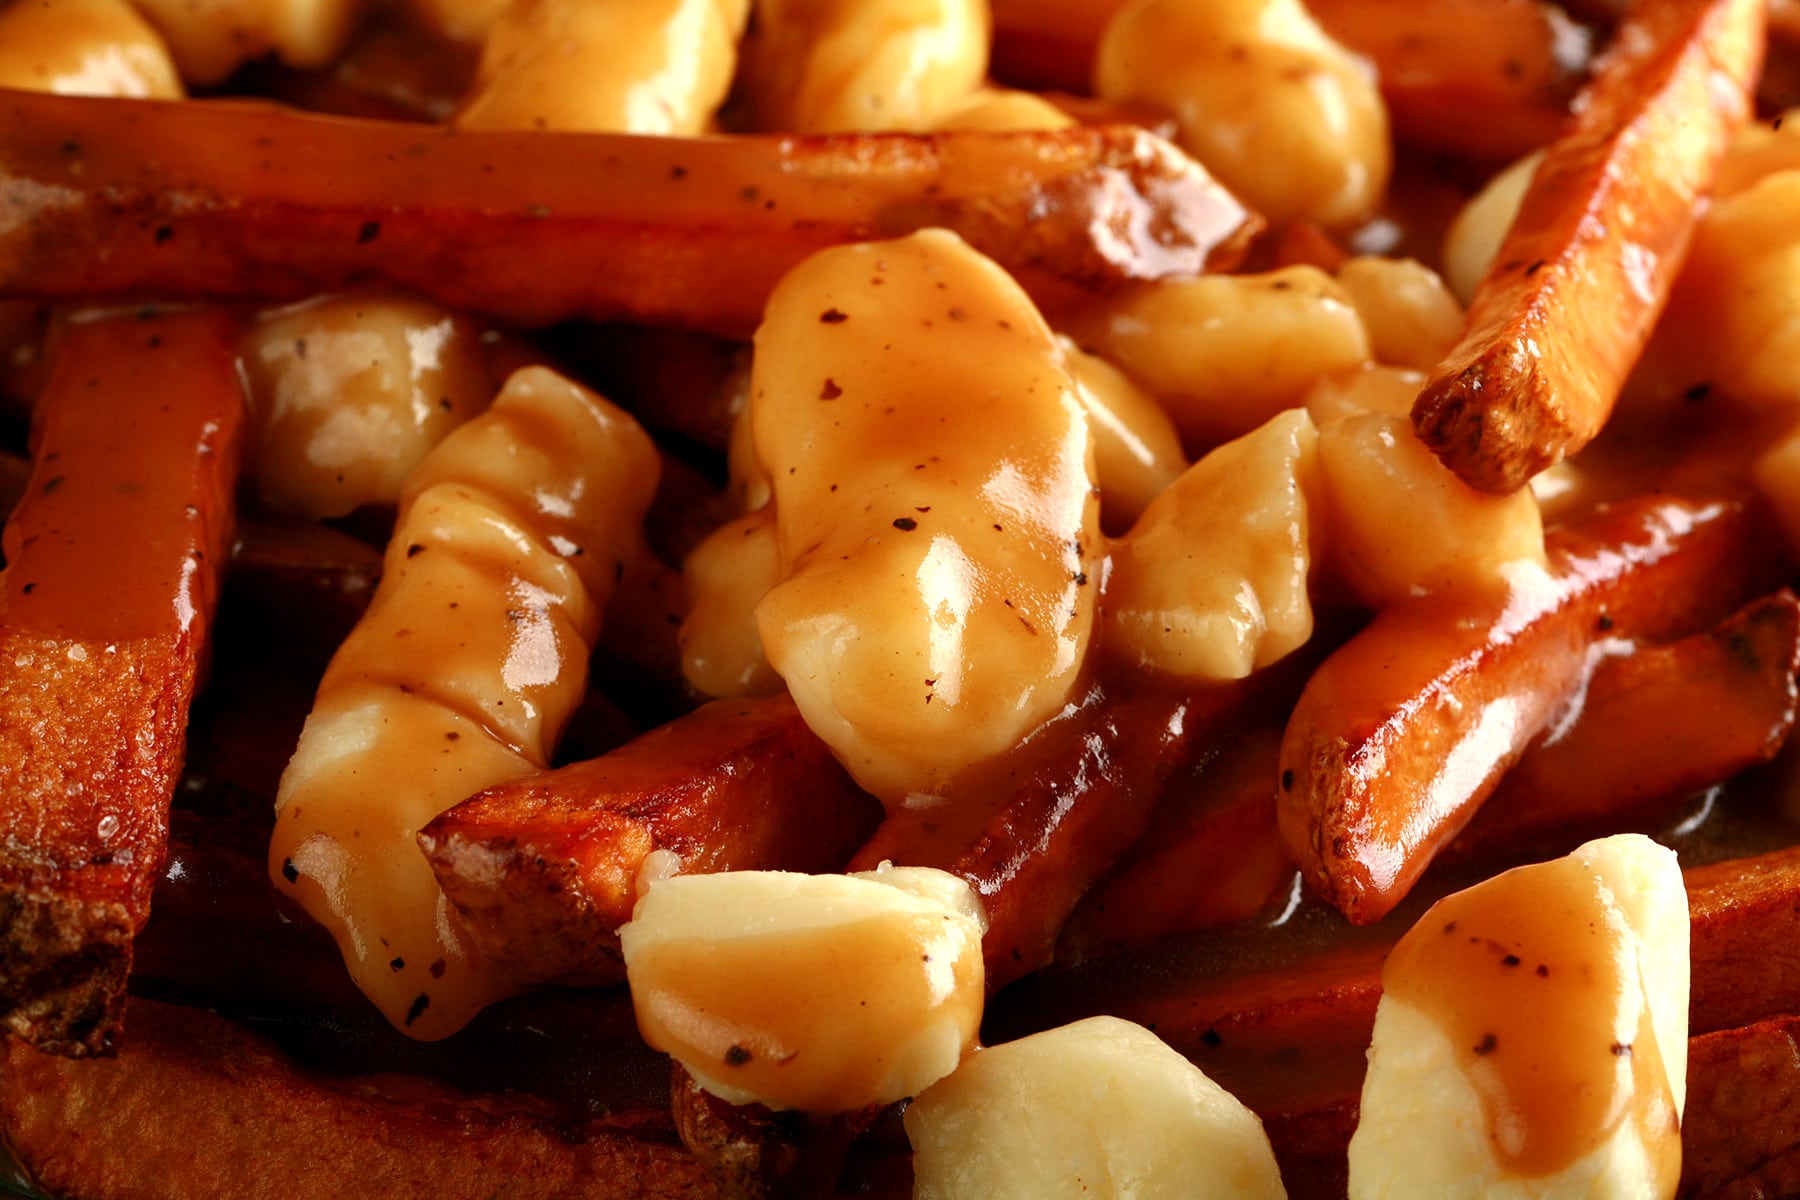 A close up view of poutine - fries, white cheese curds, and gravy.